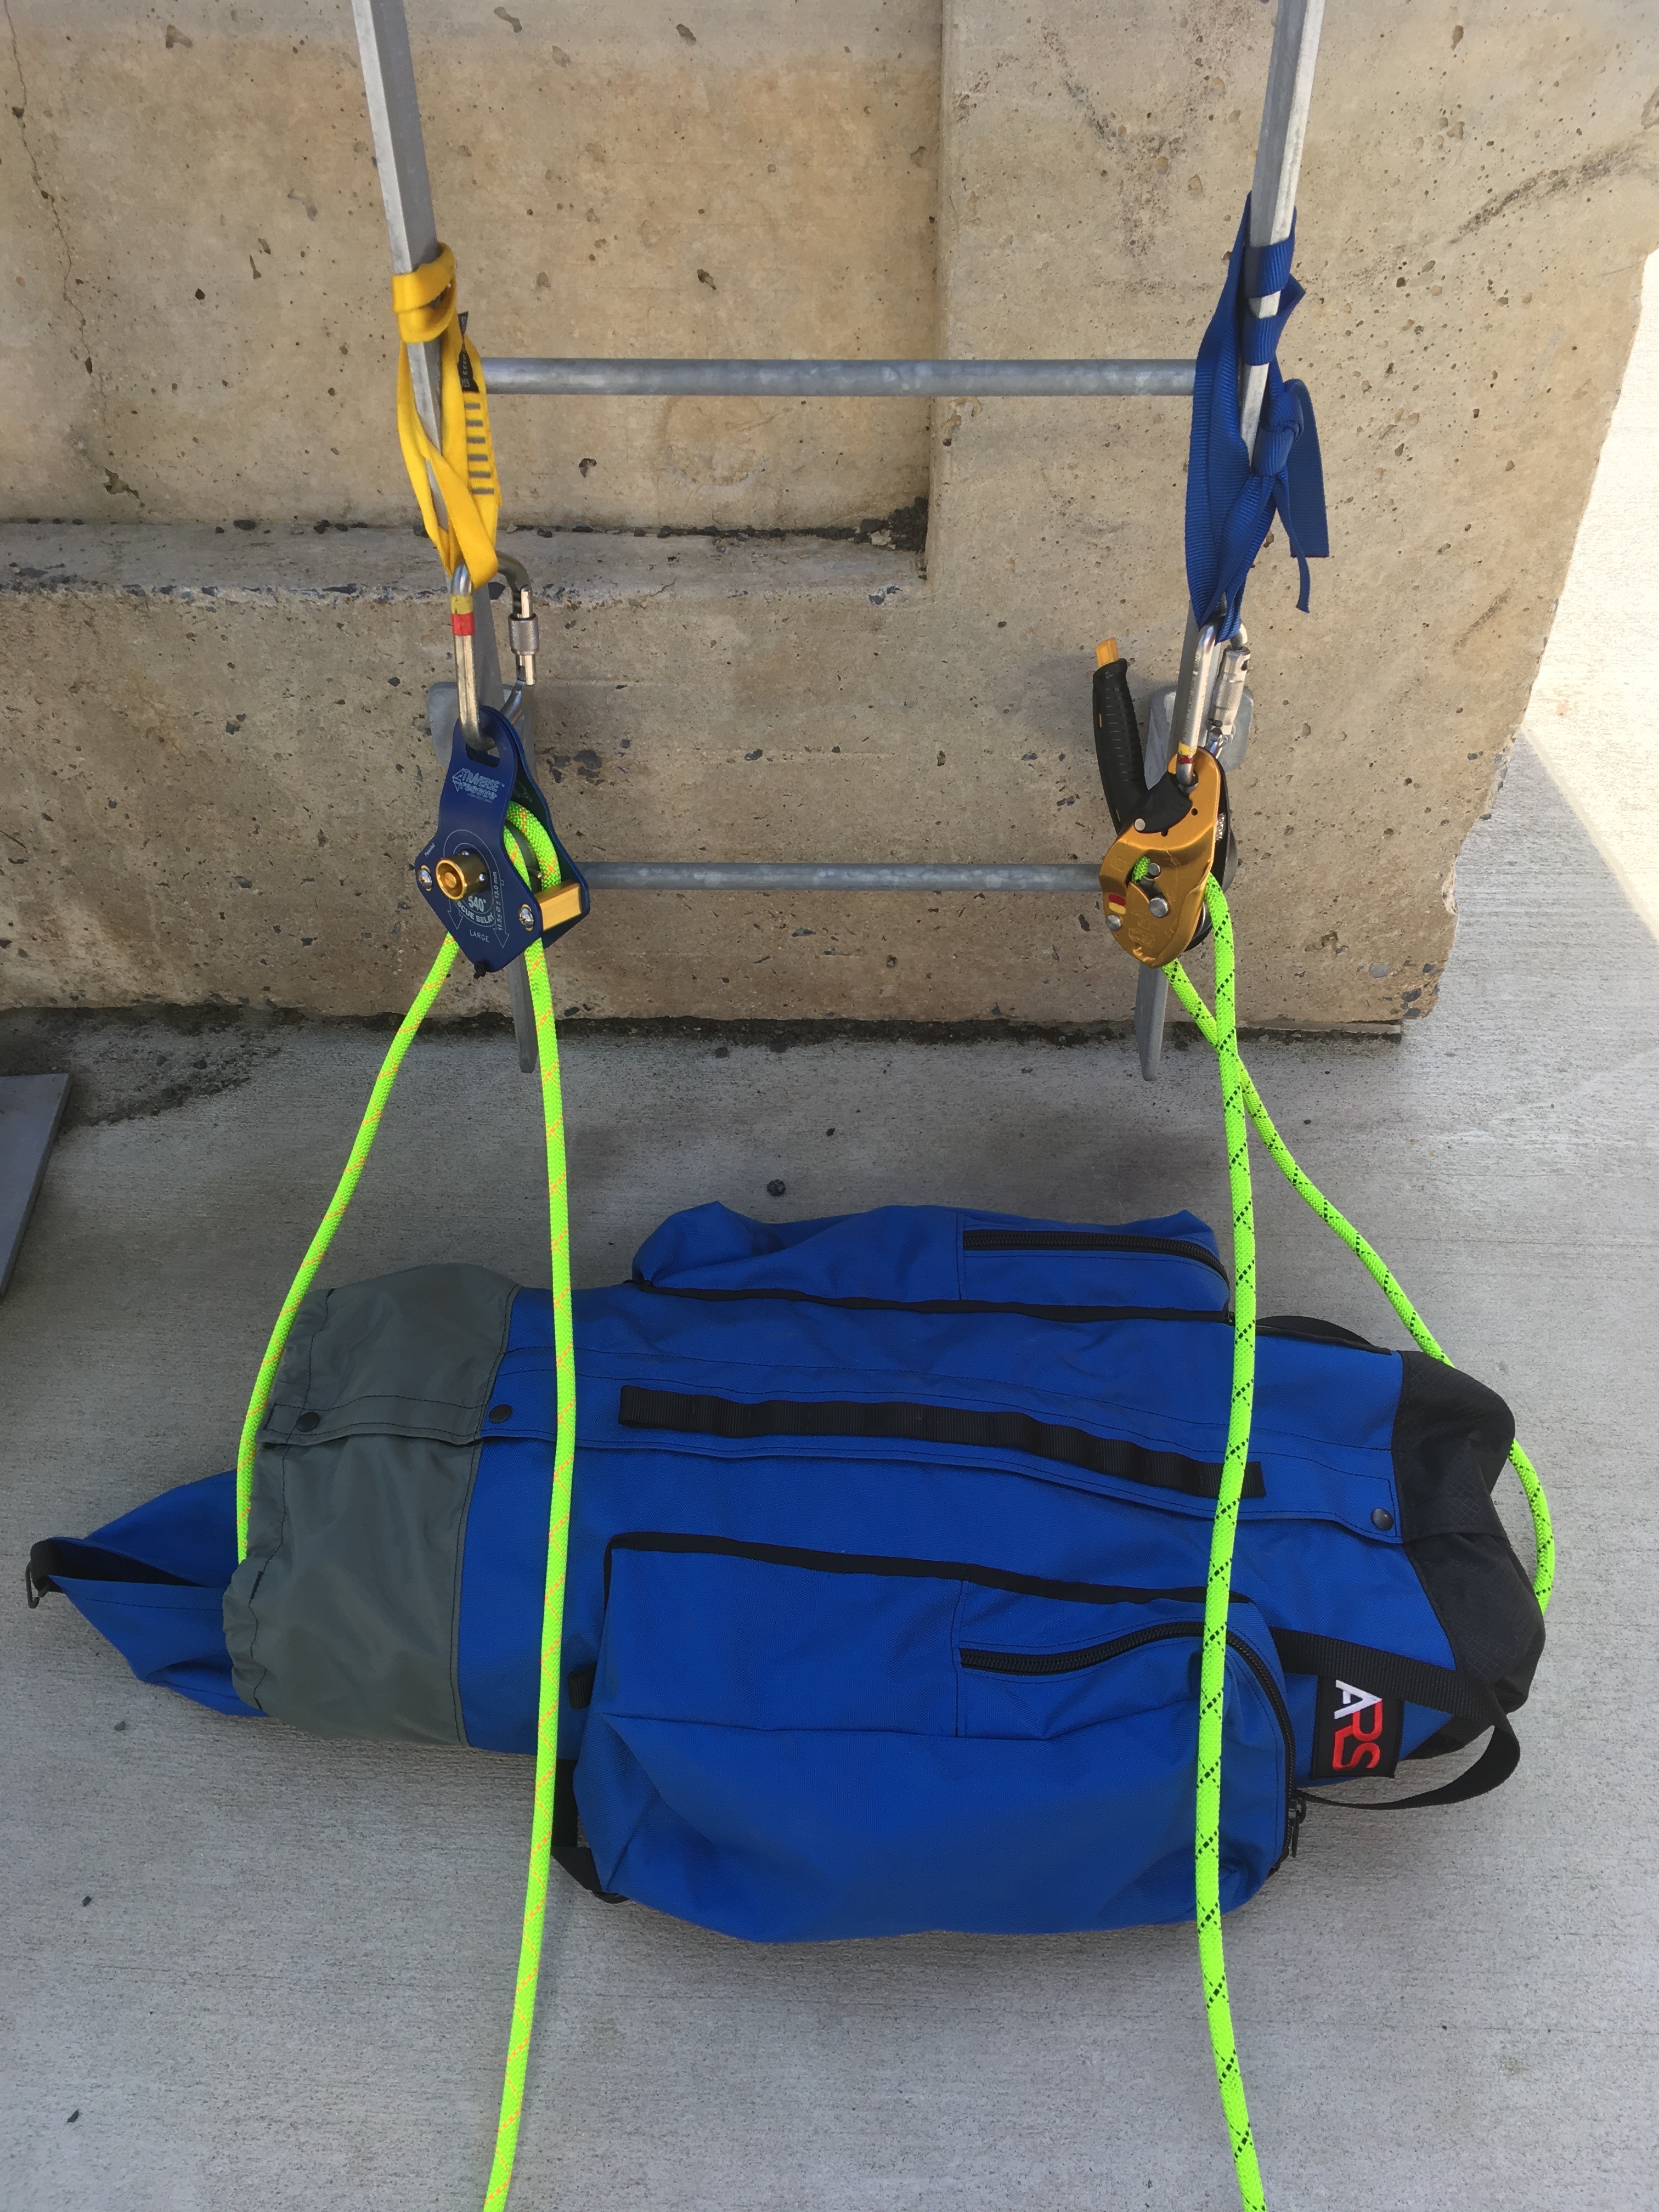 Details about   Medium Size Blue Rope Bag 20” X 14” For Rescue/ Climbing/Caving Rope Storage ER3